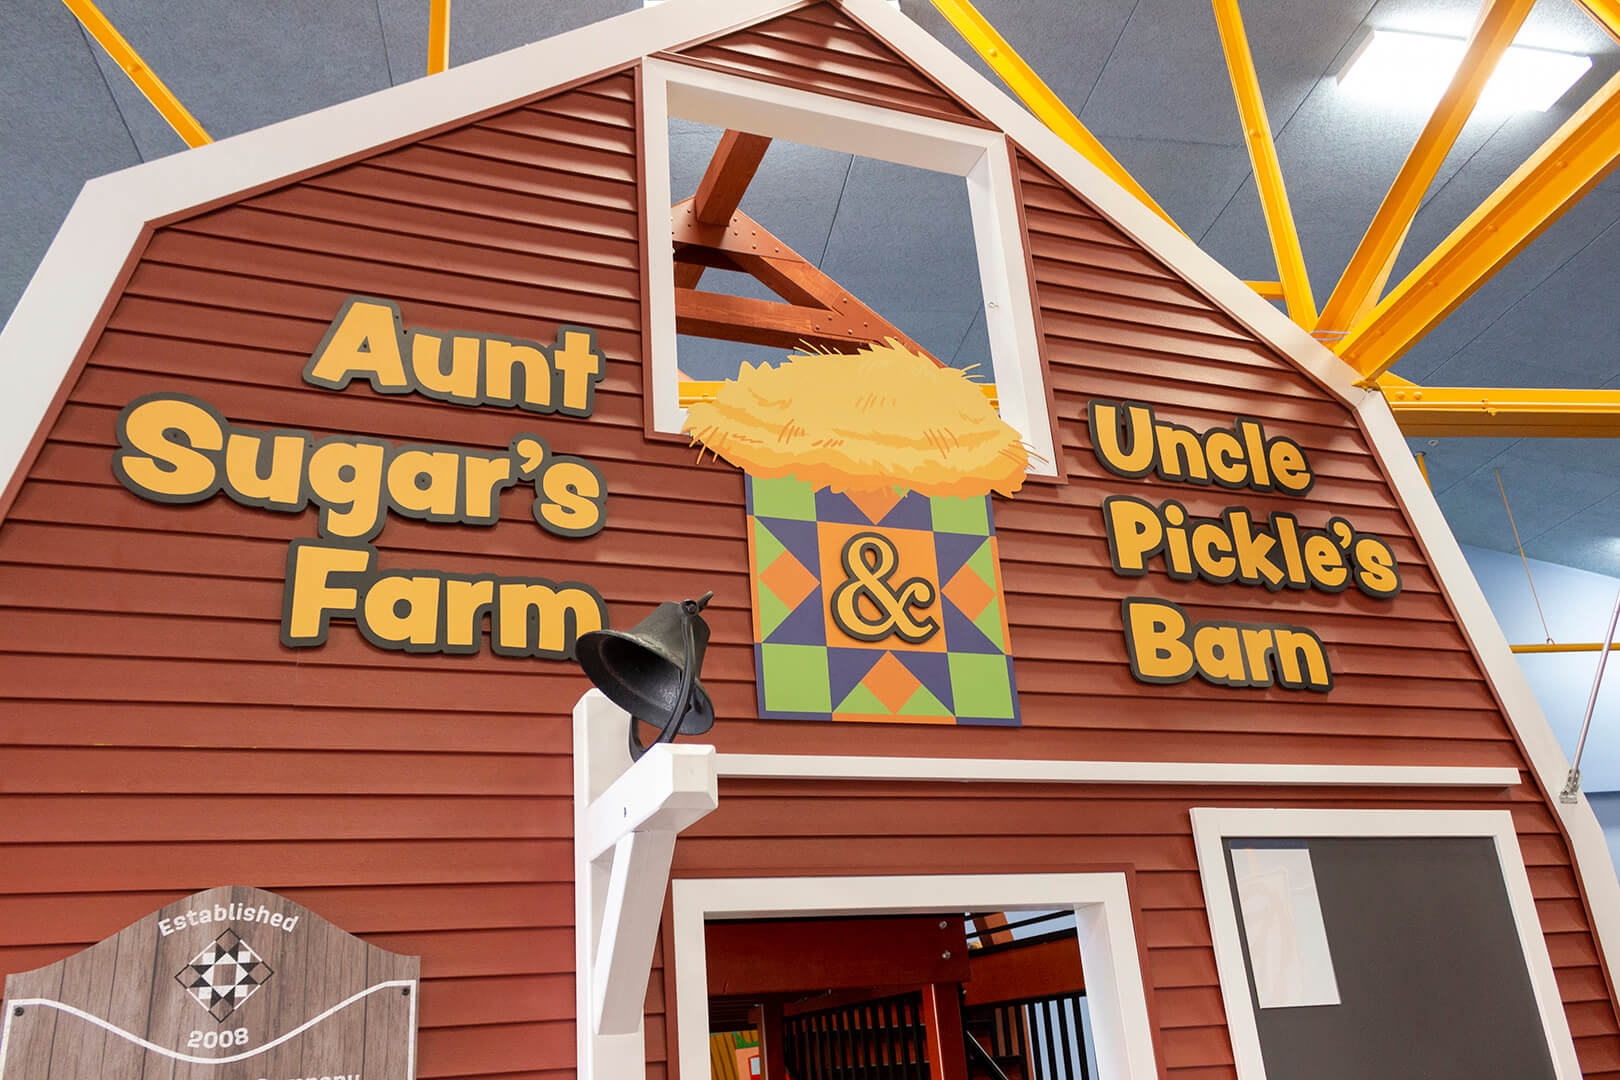 Sign outside farm exhibit. Text reads, "Aunt Sugar's Farm and Uncle Pickle's Barn."